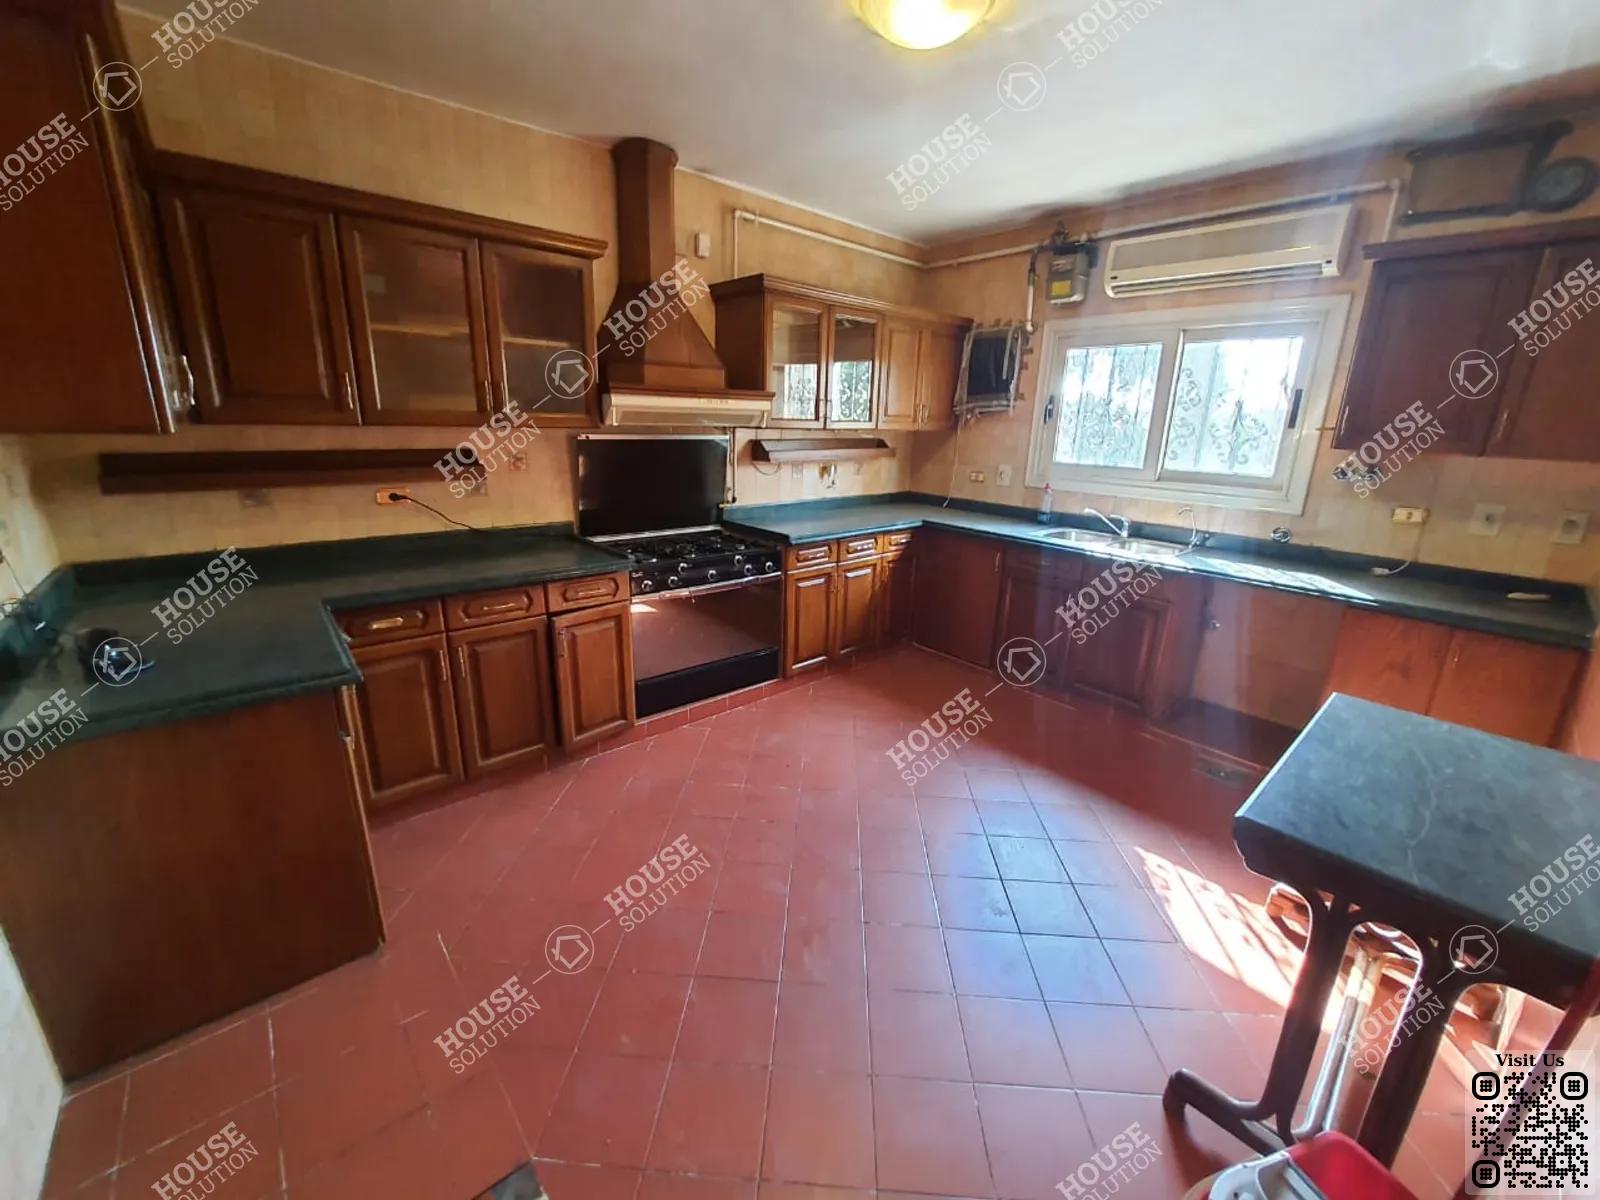 KITCHEN  @ Apartments For Rent In Maadi Maadi Degla Area: 240 m² consists of 3 Bedrooms 3 Bathrooms Modern furnished 5 stars #4991-1